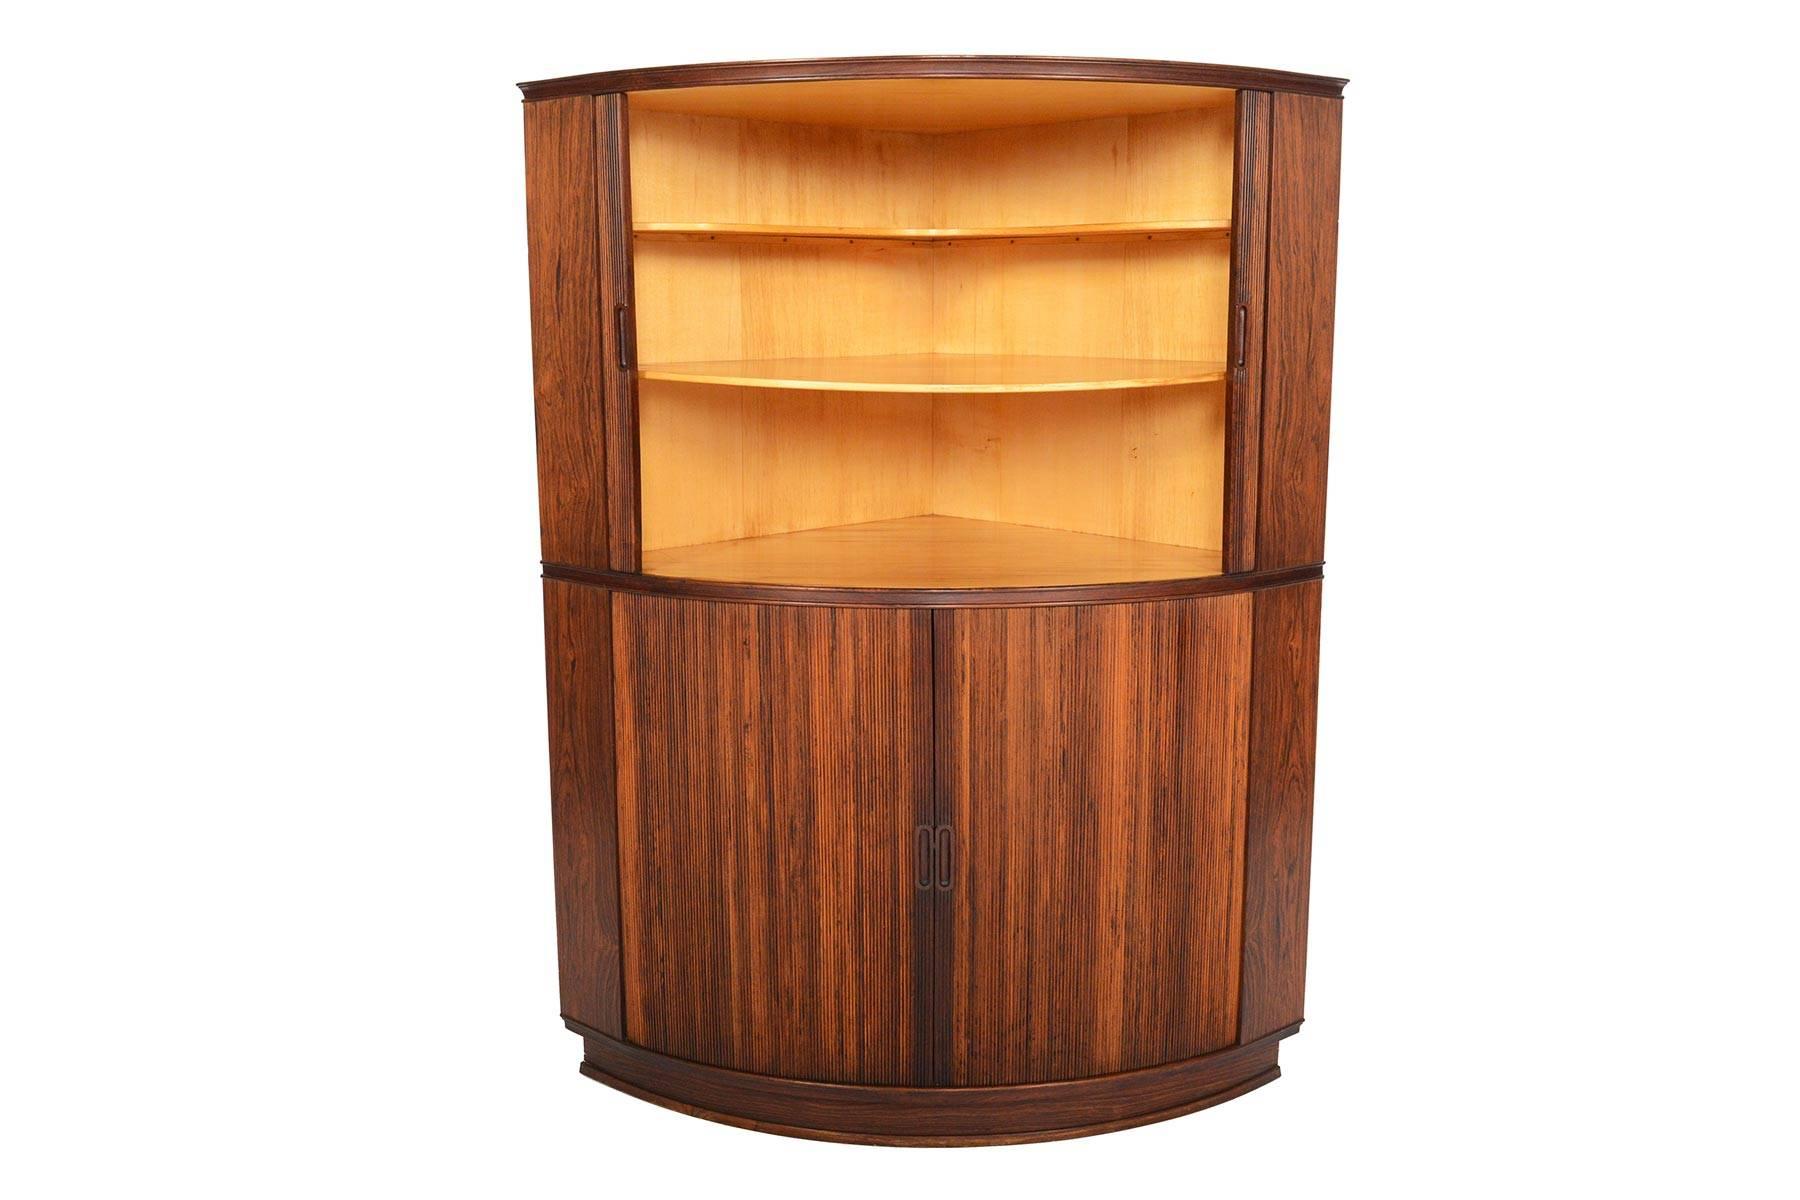 This Danish modern corner cabinet is crafted in Brazilian rosewood and features two tiers of tambour perfection! A wonderful storage piece, doors smoothly open to reveal birch lined interiors and fixed shelves. In excellent original condition with